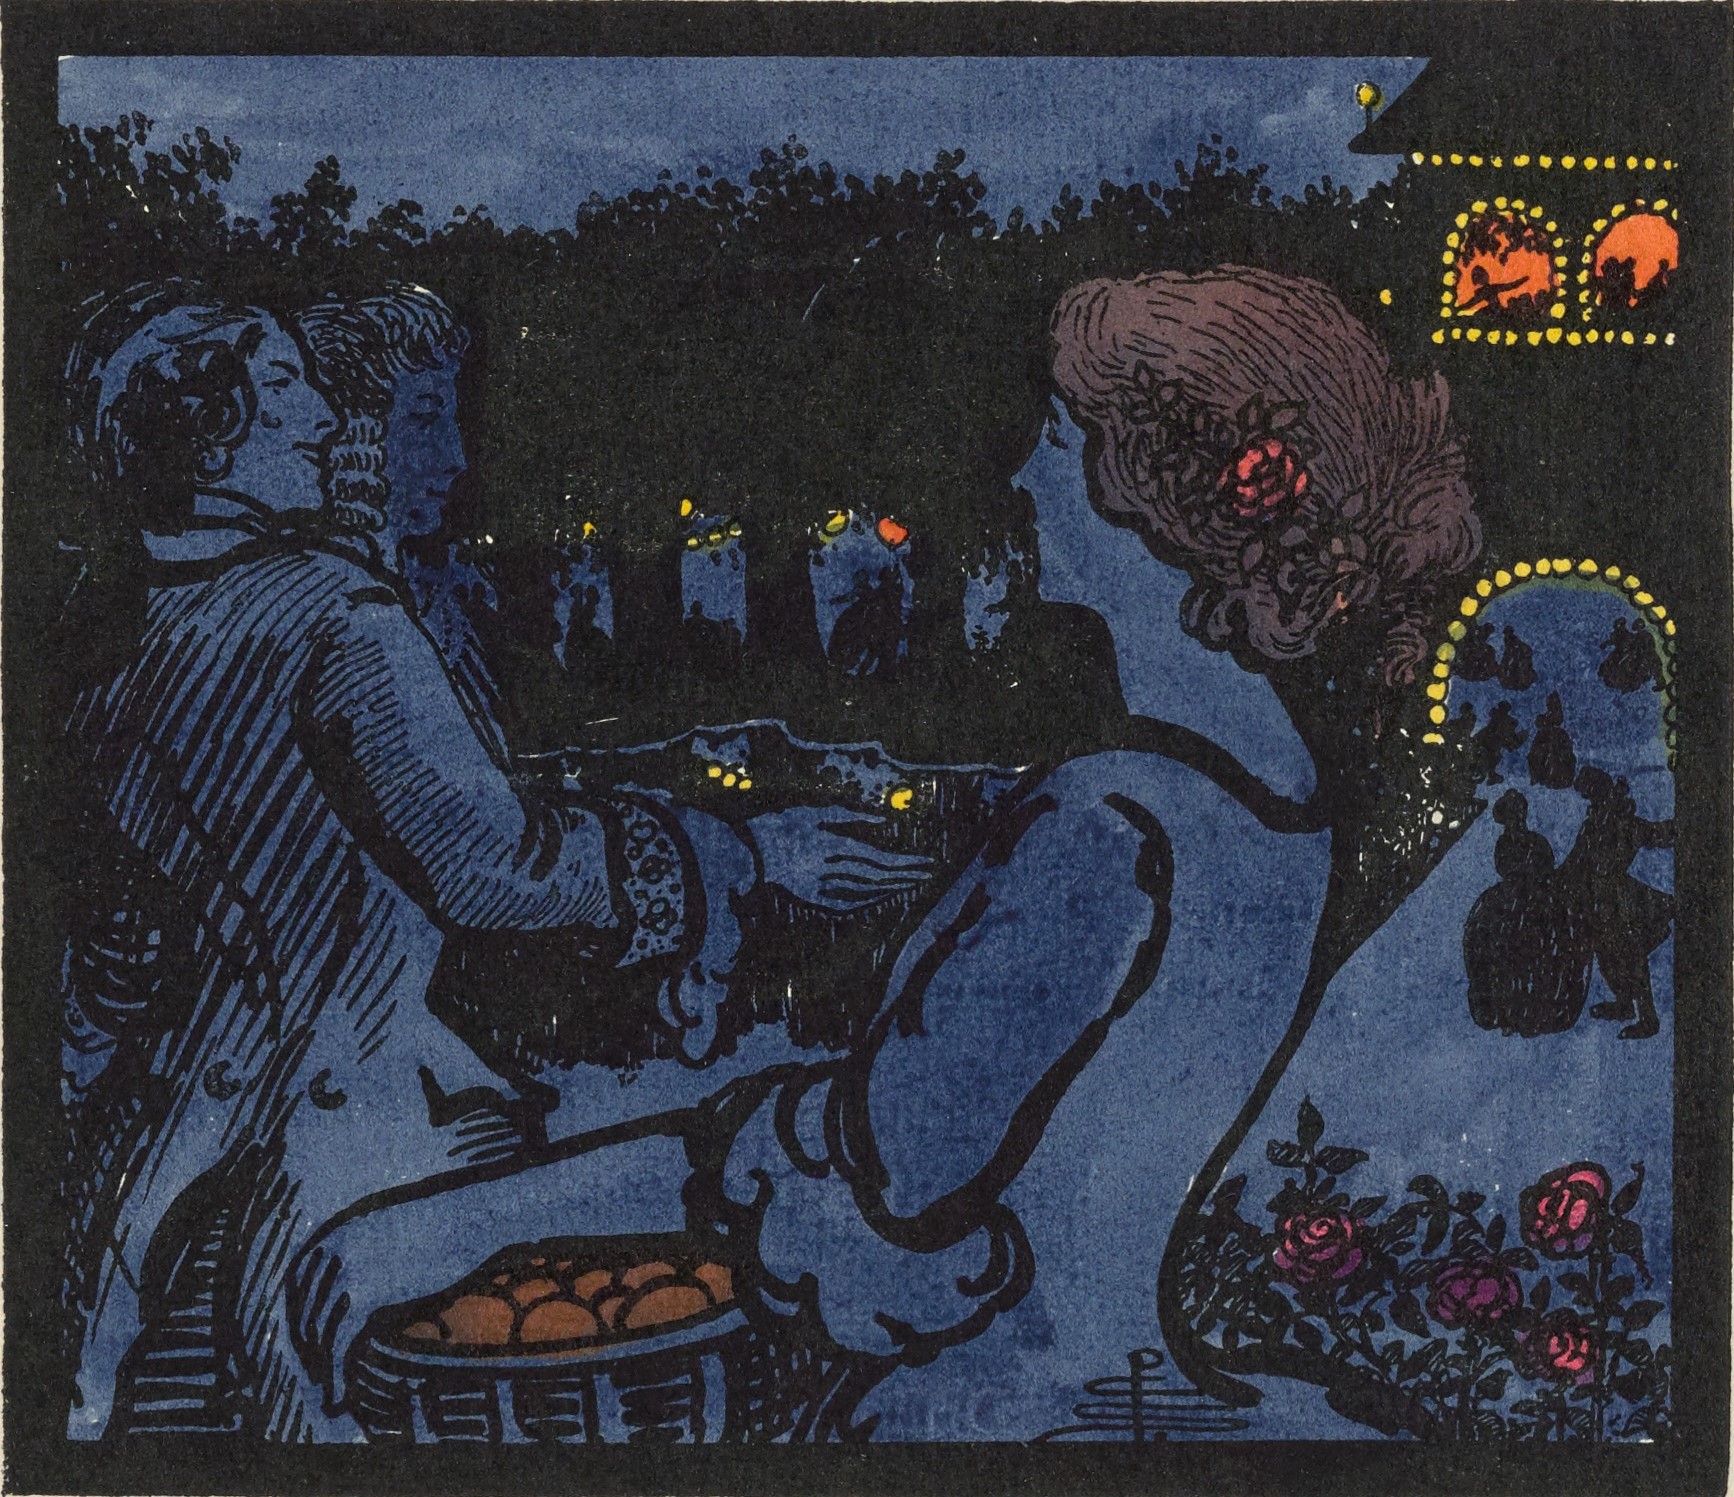 The hand-coloured half-page illustration has a thick, black square border, and is centered on the page above the text of the poem “The Town.” The image depicts a night scene in shades of deep blue and black, highlighted by small yellow and orange lights and red and orange fruits and flowers. In the centre foreground, a woman stands in profile, facing left, carrying a basket of oranges, a rose in her upswept brown hair. Behind her, two gentlemen in 18th-century dress walk toward the right, conversing. Behind them is a building, arcade, and grove, filled with people silhouetted in black. In the building, which rises on the right background of the image, silhouetted people are visible in a brightly lit orange window. In the right foreground, a briar of red roses is visible. The artist’s monogram is in the centre bottom of the image, in the woman’s skirt.